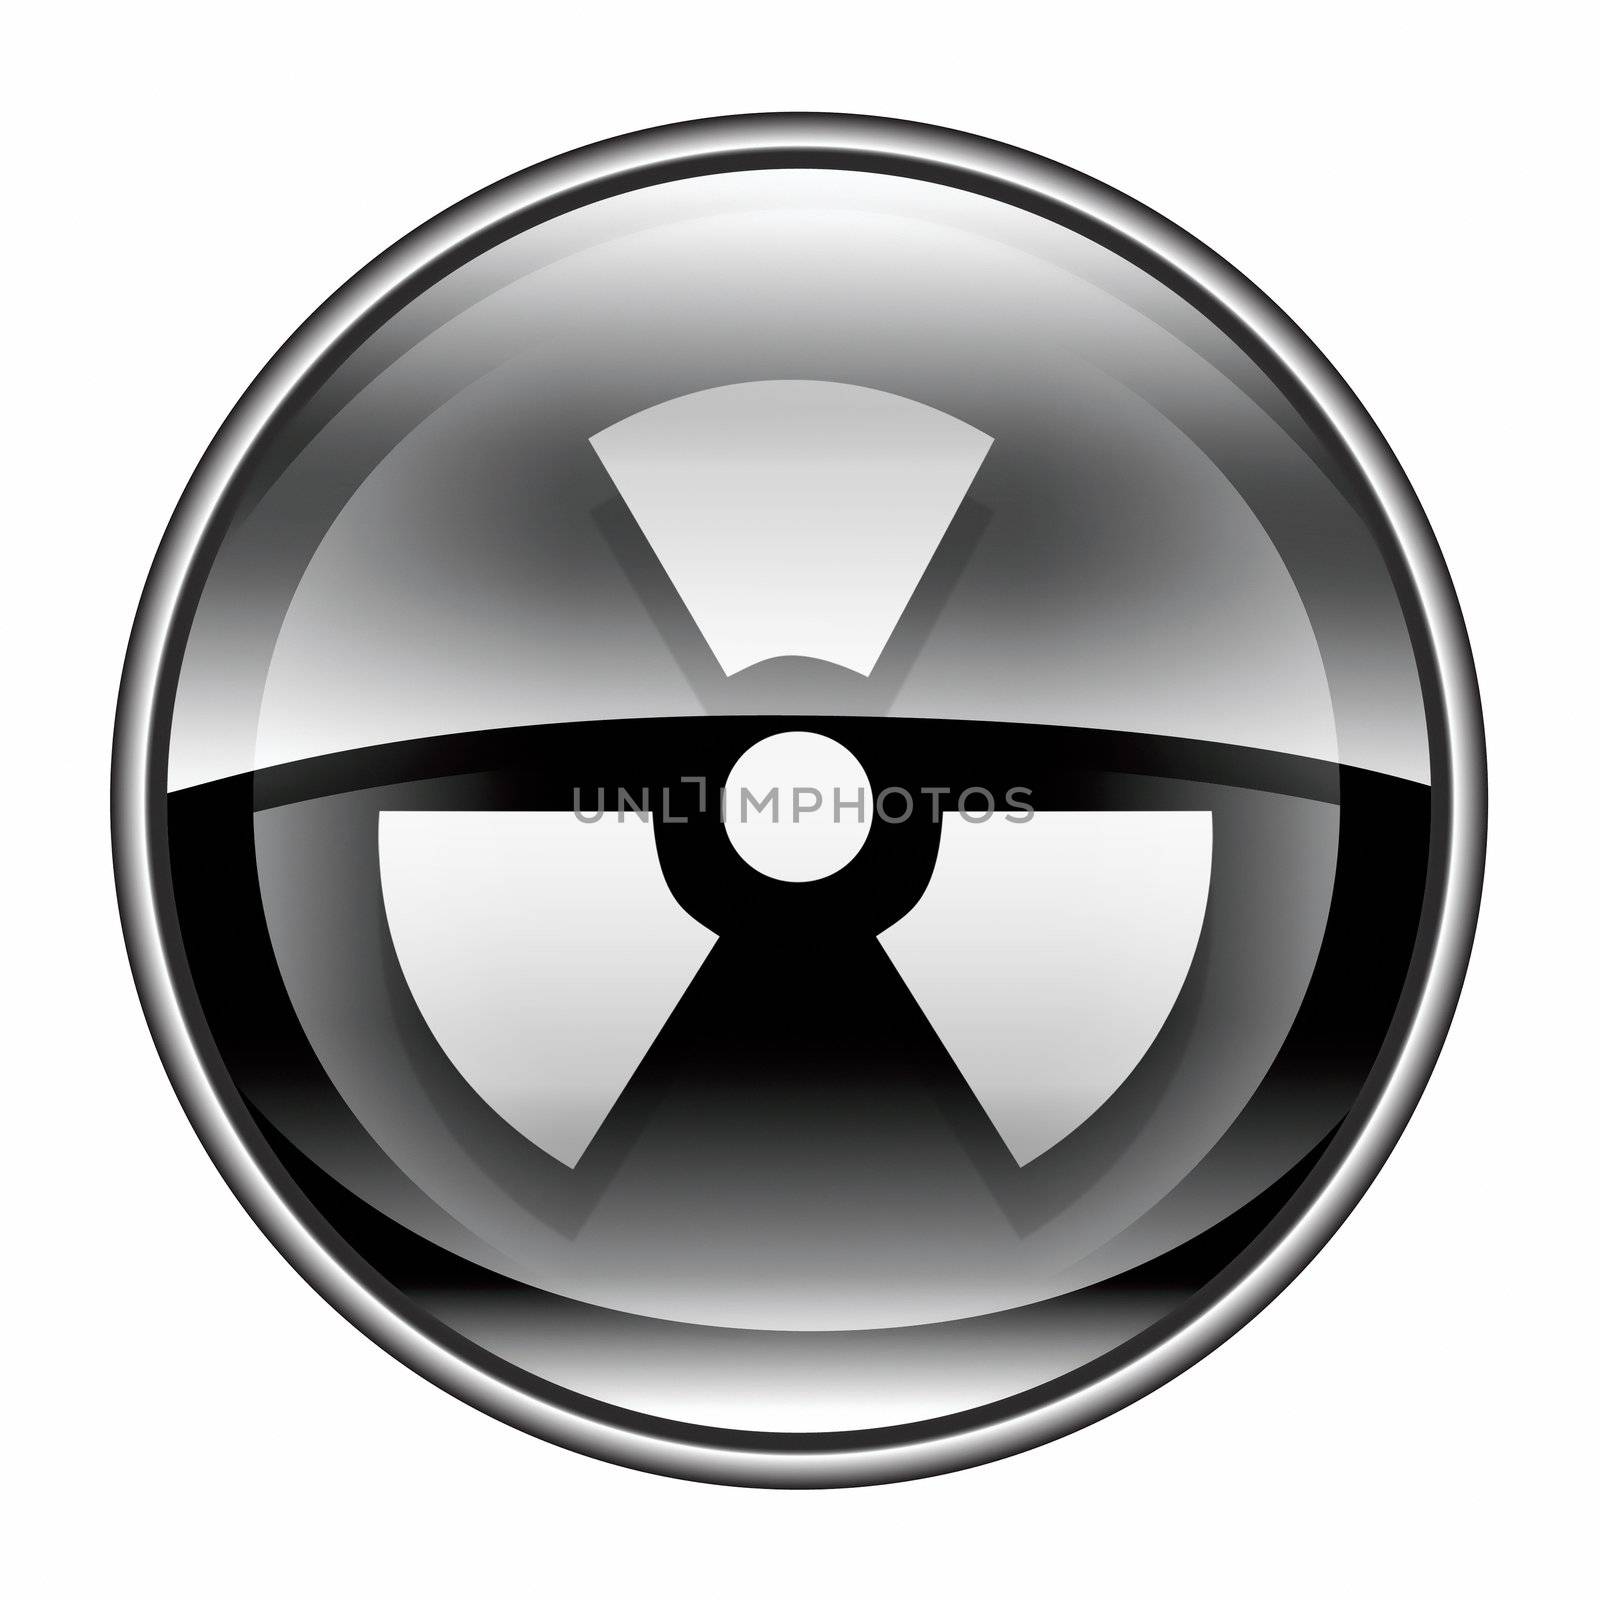 Radioactive icon black, isolated on white background. by zeffss